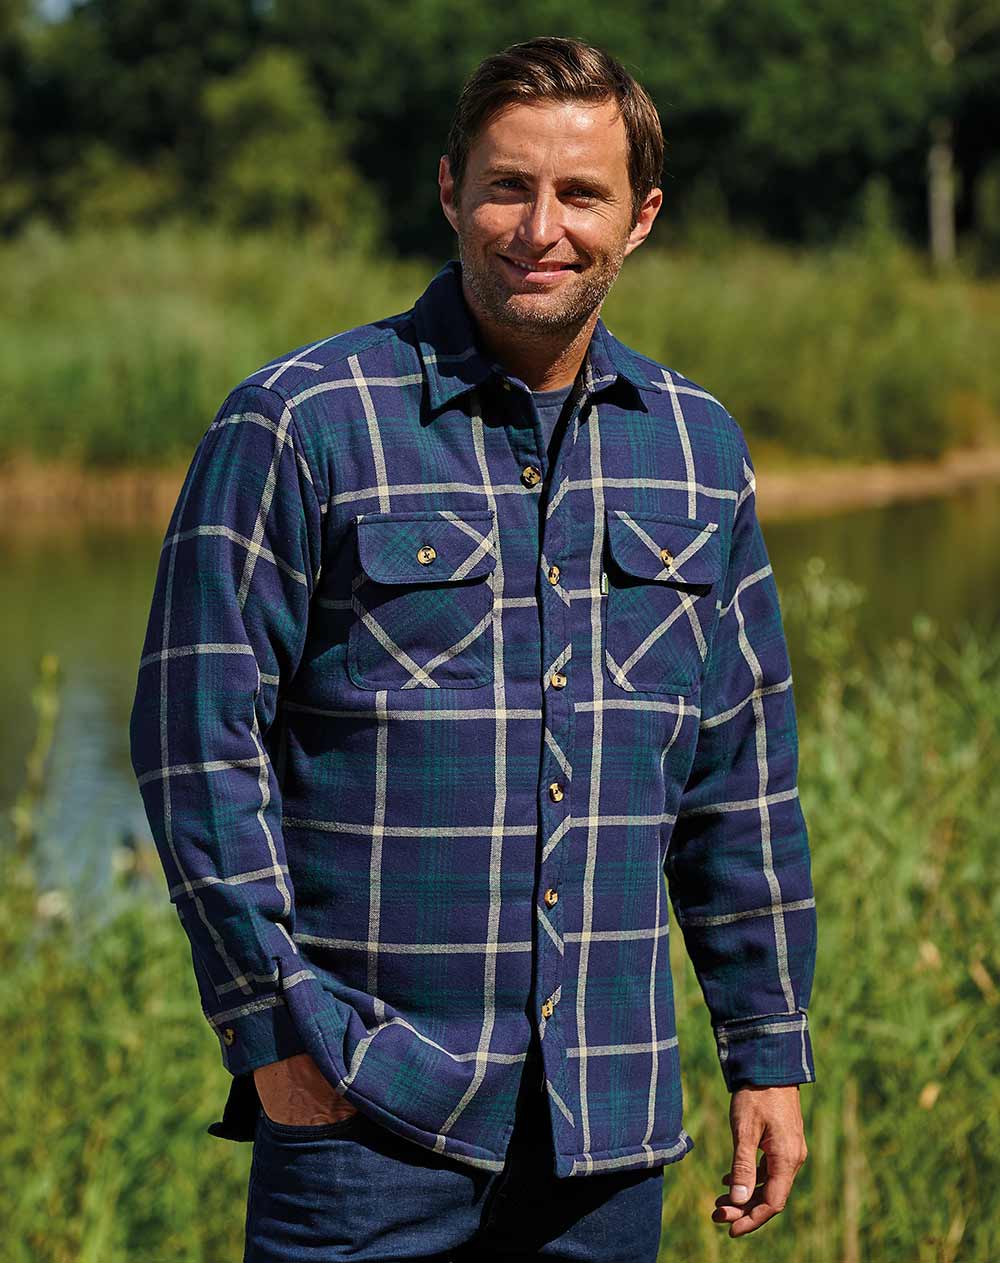 Outdoor work shirt Champion Totnes Quilted Padded Shirt Blue lumberjack check 